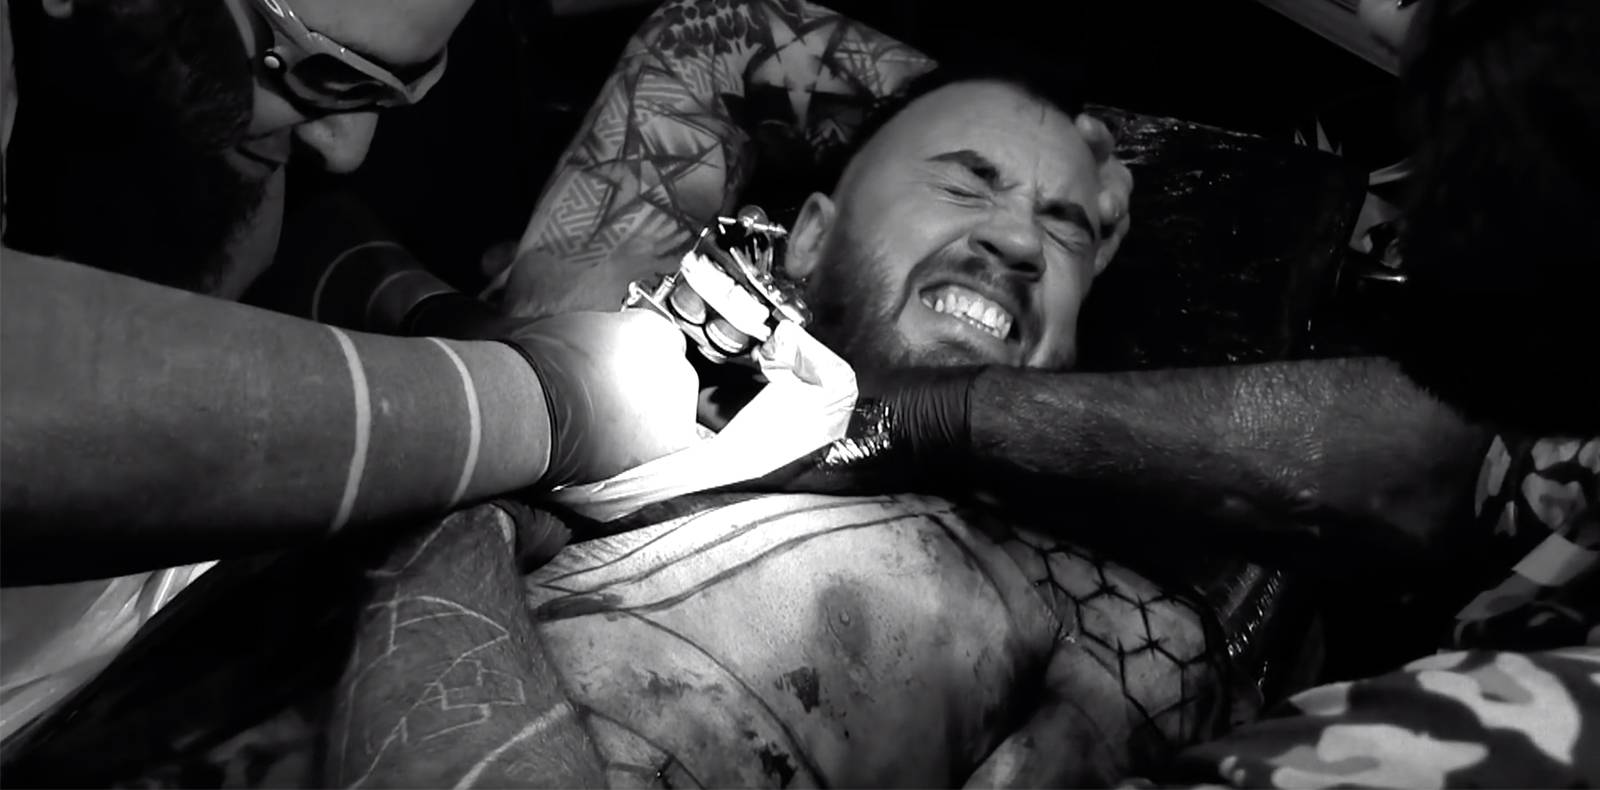 Blood and tears: the terrifying Brutal Black Tattoo Project